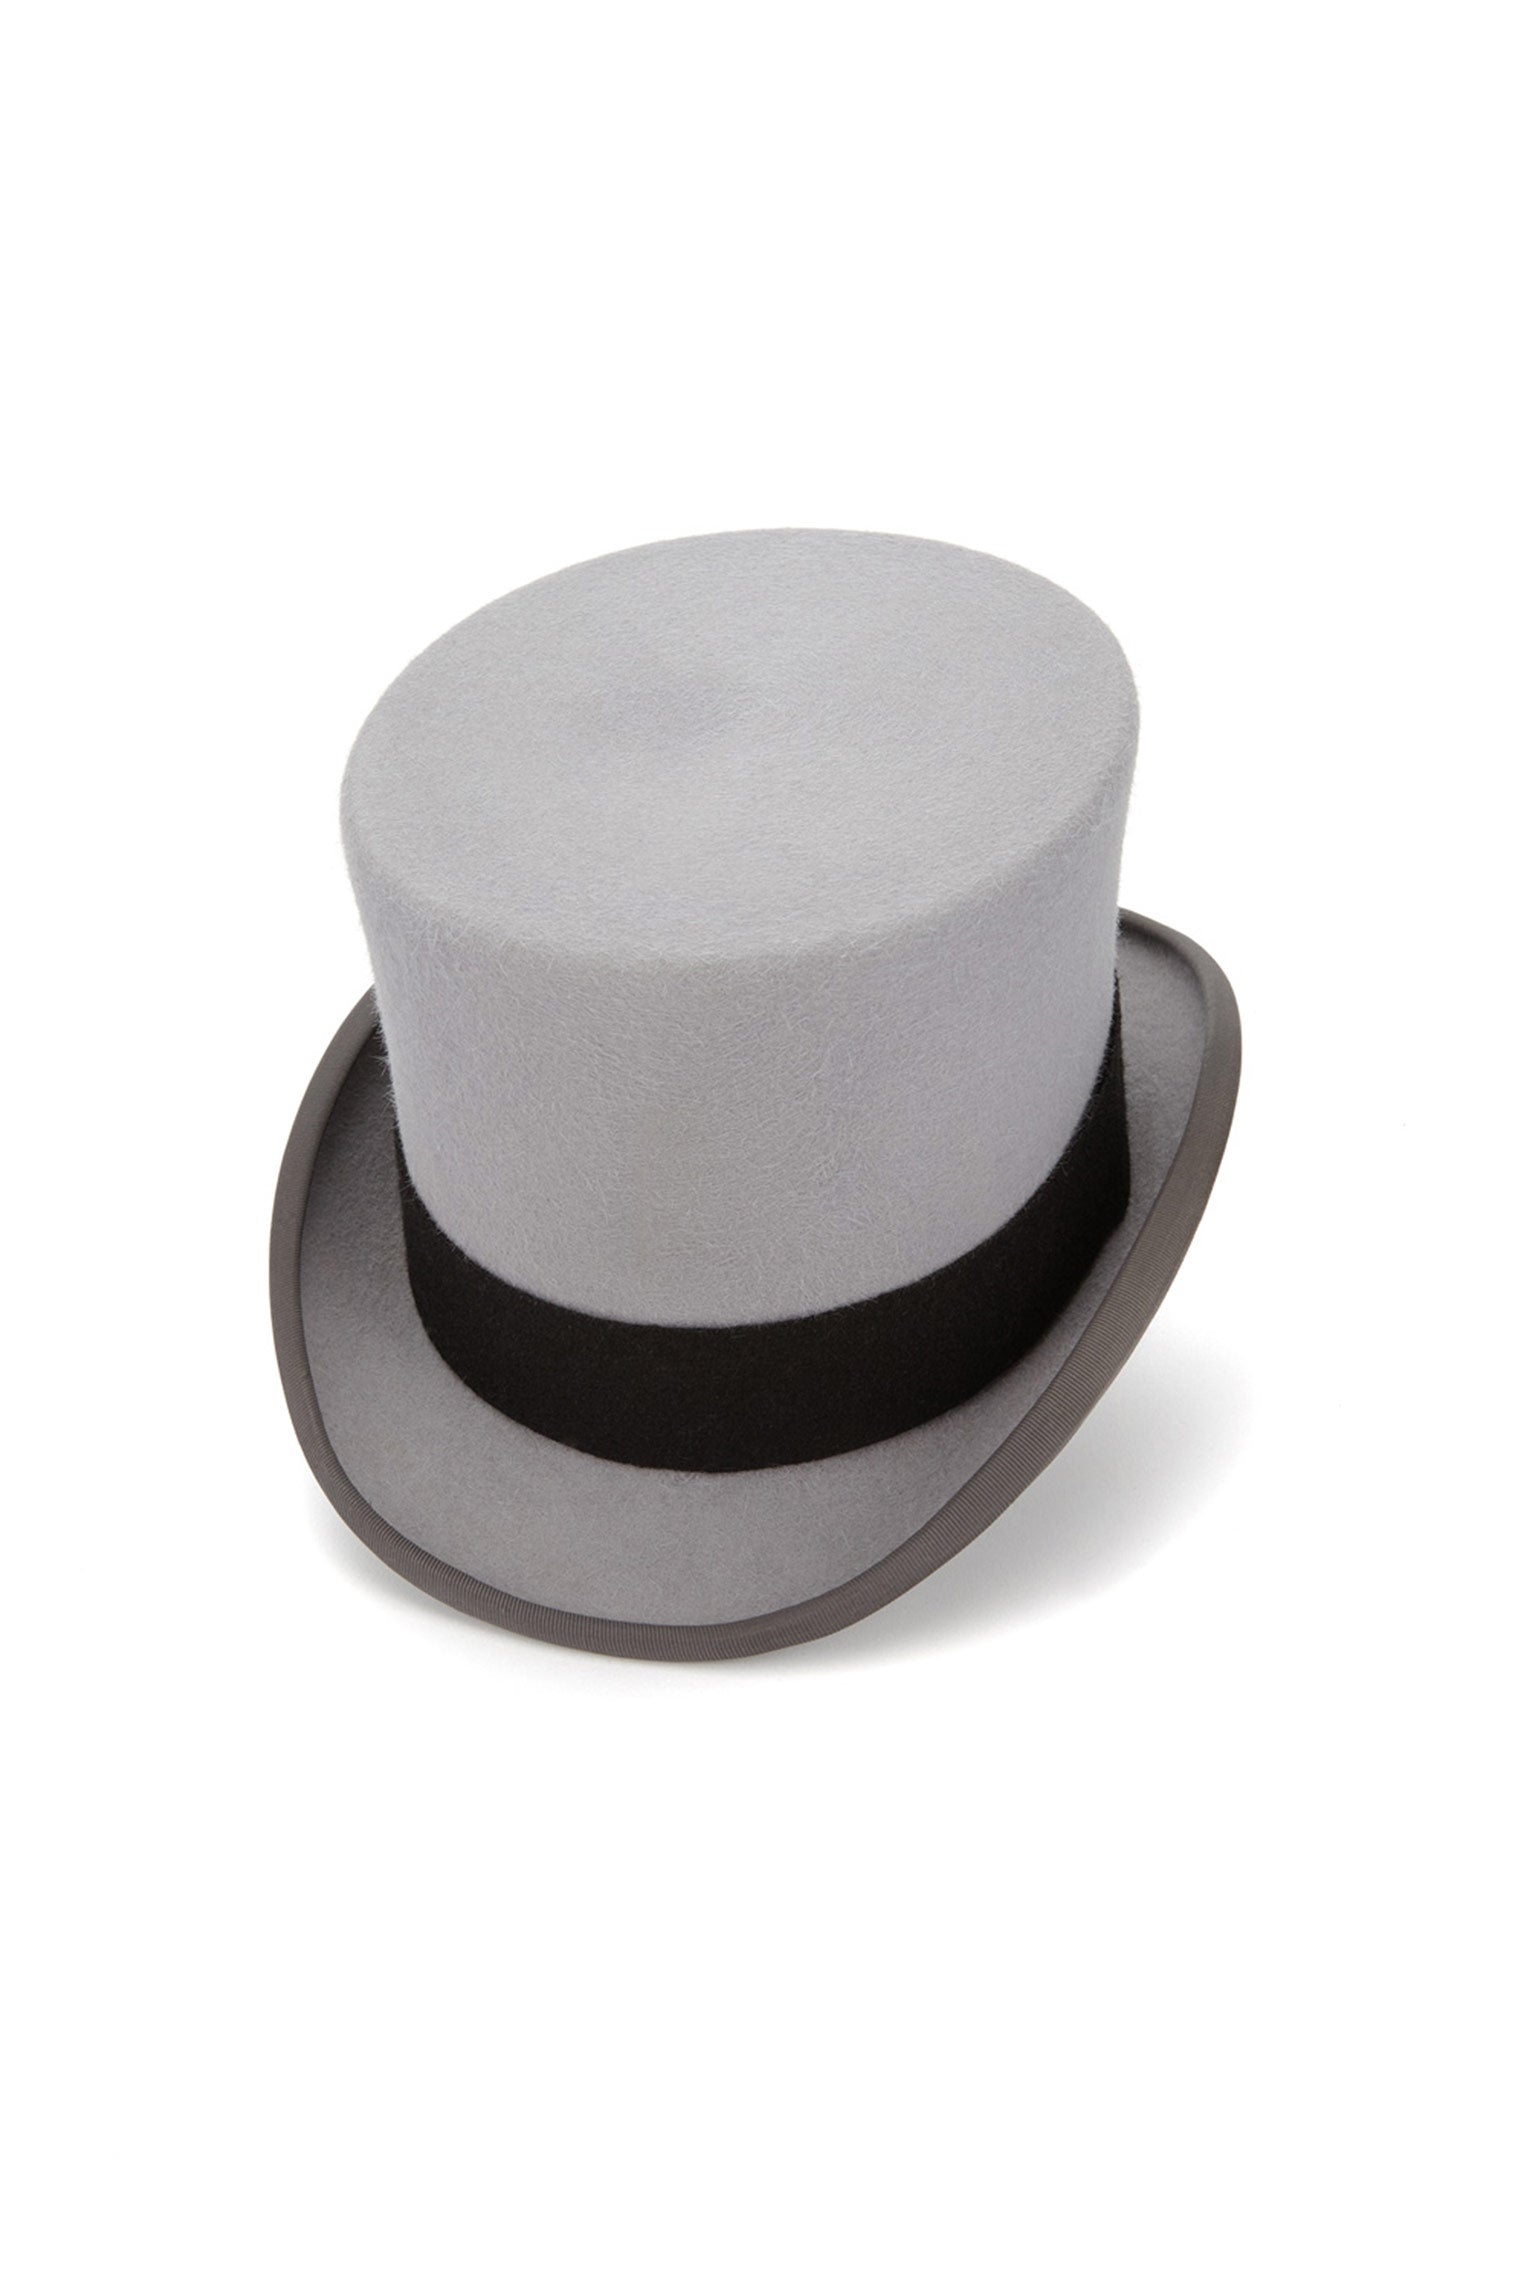 Ascot Top Hat - Products - Lock & Co. Hatters London UK